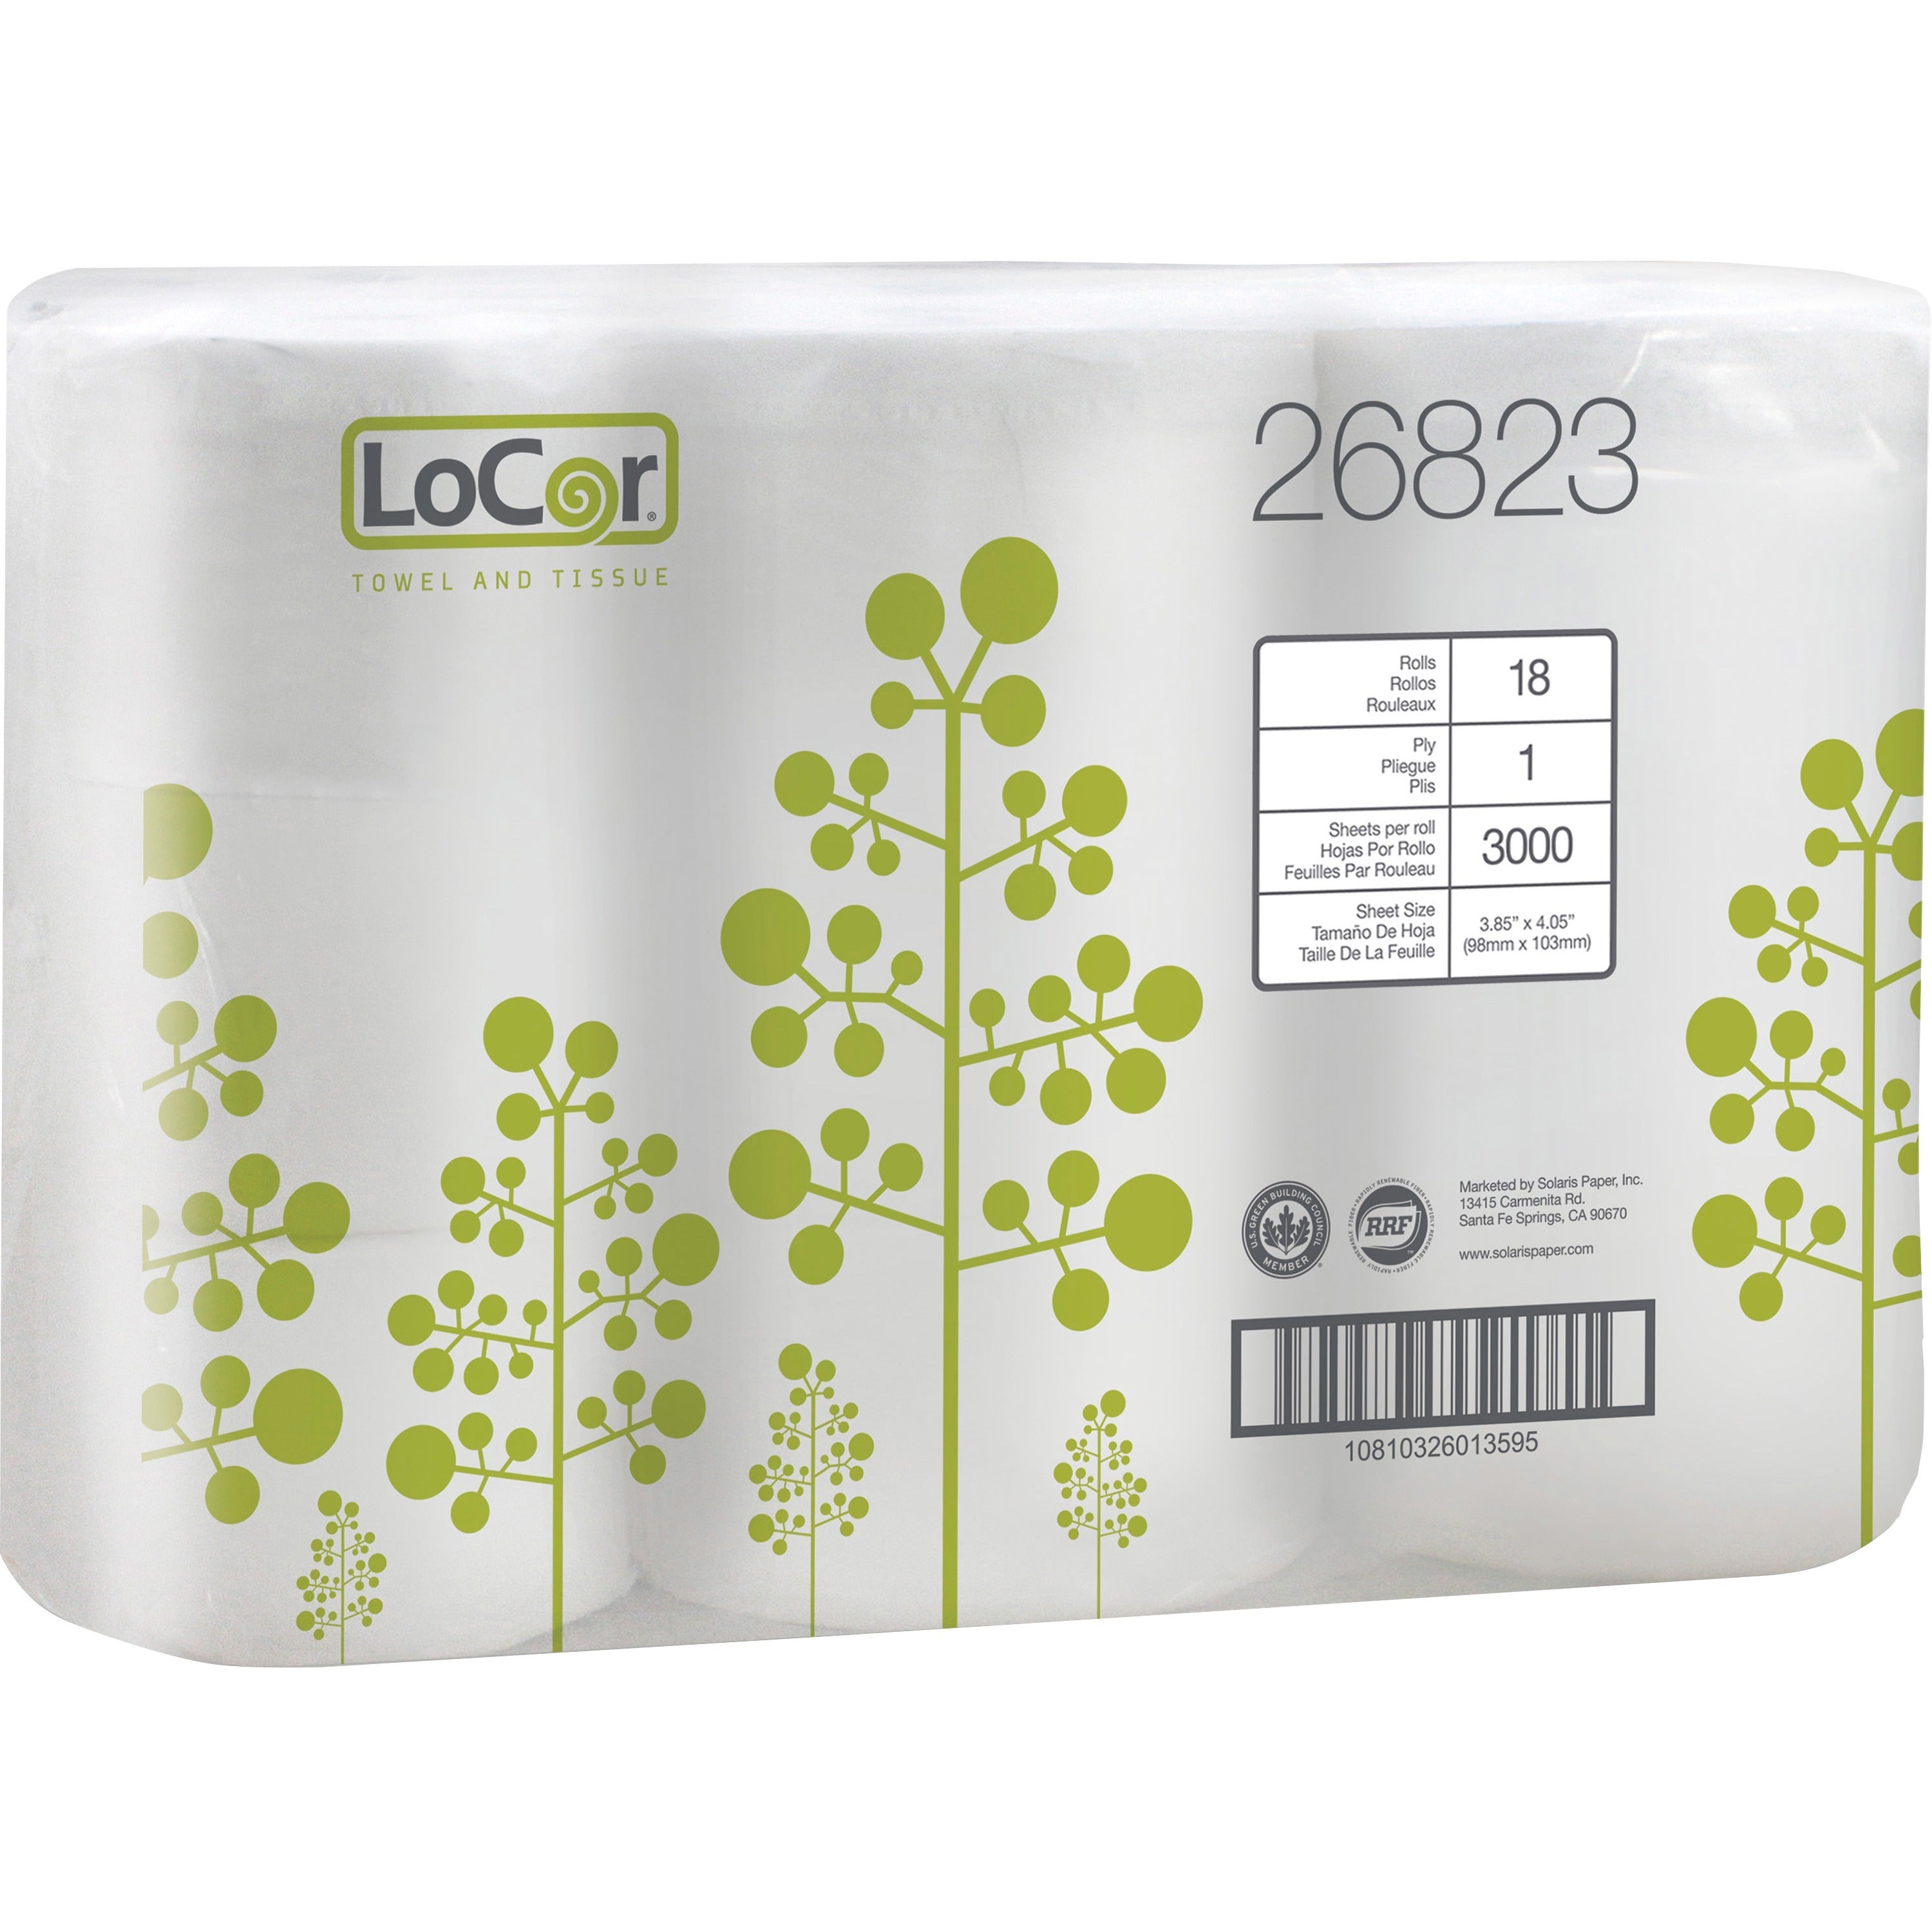 locor-high-capacity-bath-tissue-1-ply-385-x-405-3000-sheets-roll-white-single-ply-embossed-for-bathroom-home-residential-18-rolls-per-container-6-box_sol26823 - 1